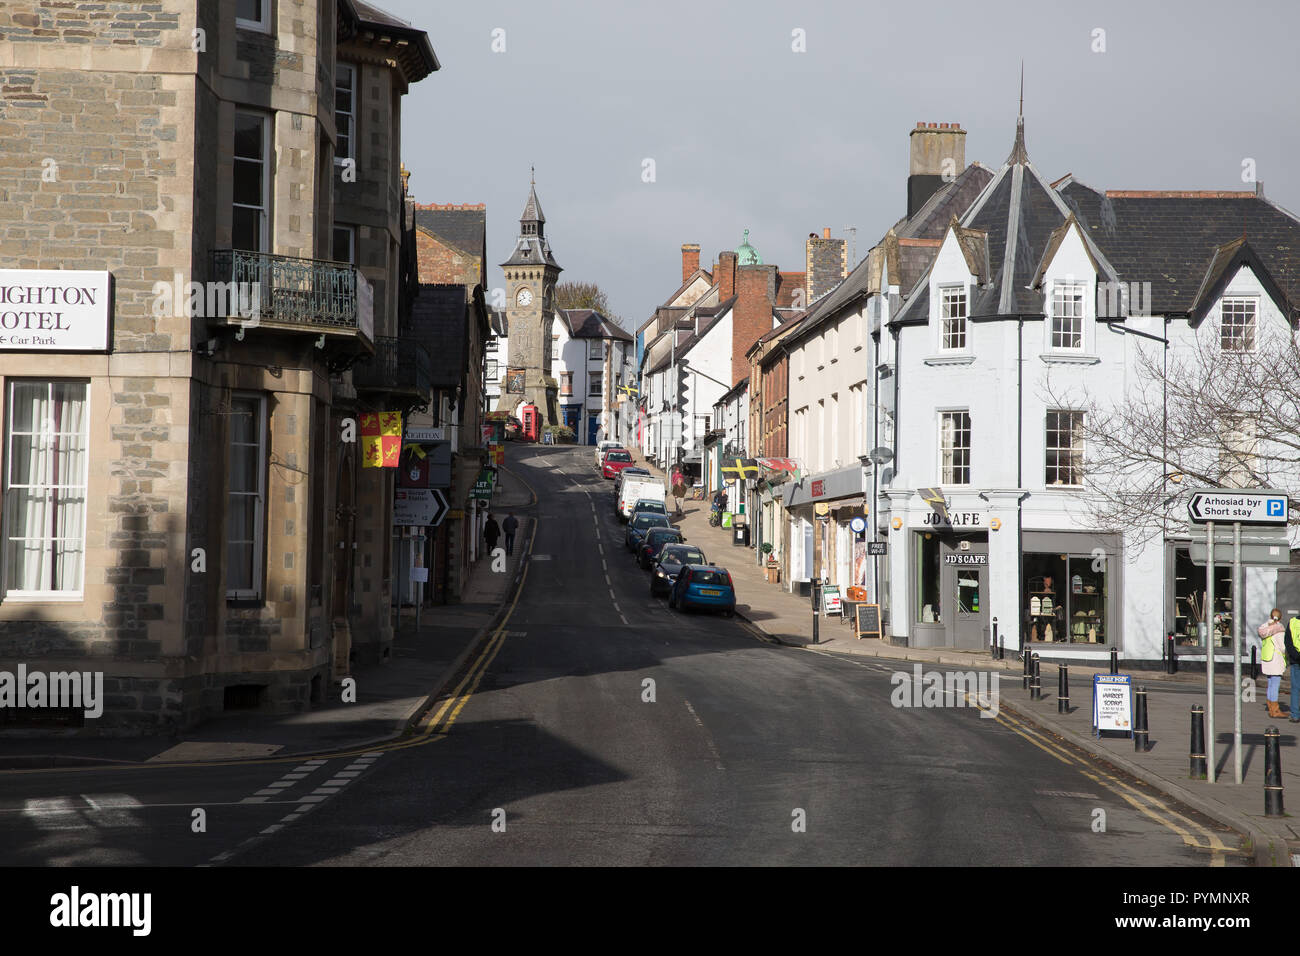 A view up the High Street in Knighton, Wales Stock Photo